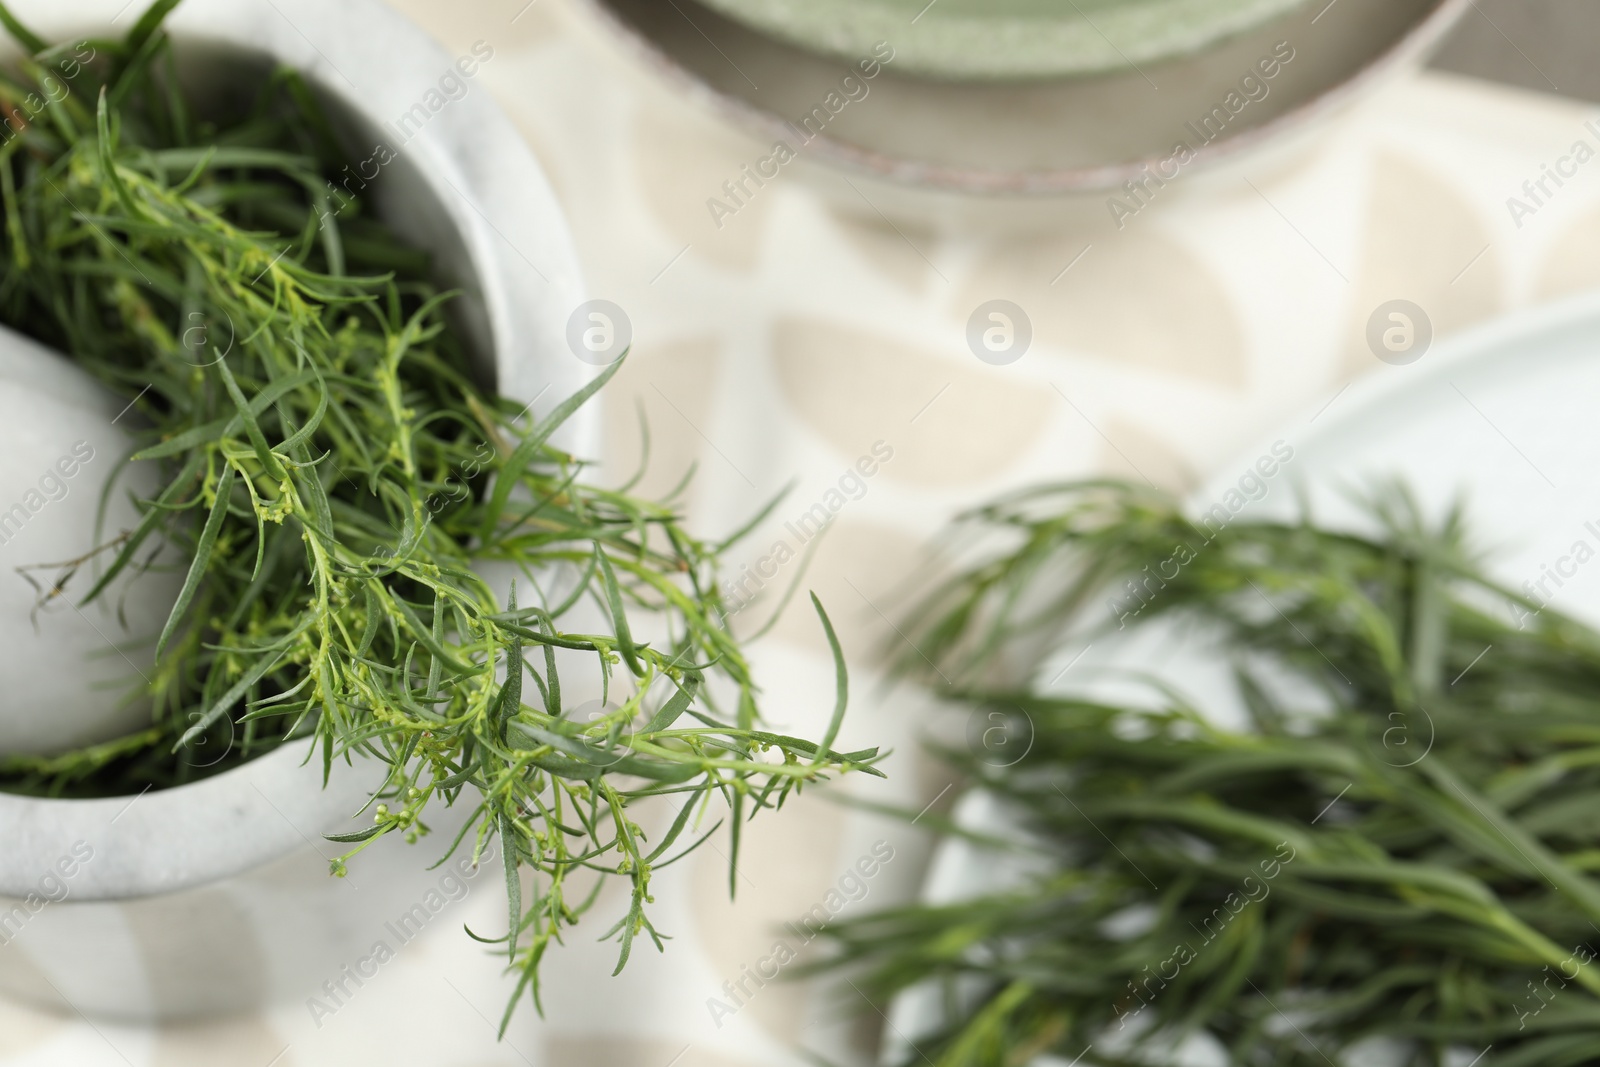 Photo of Plate and mortar with fresh tarragon leaves on table, above view